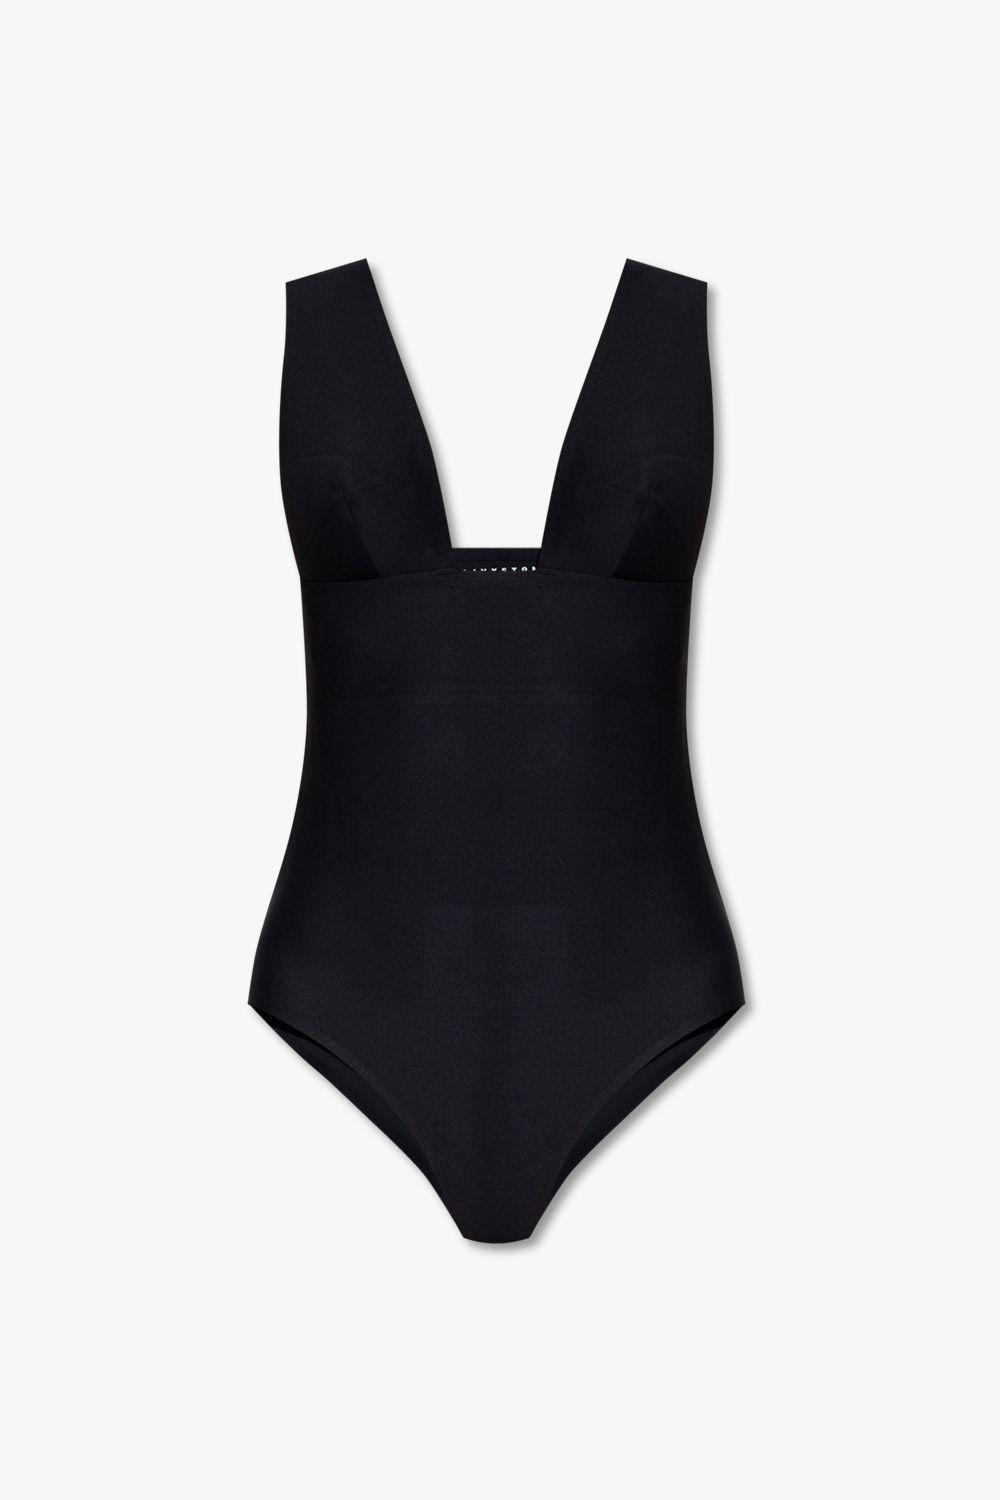 LIVY 'chelsea Park' One-piece Swimsuit in Black | Lyst